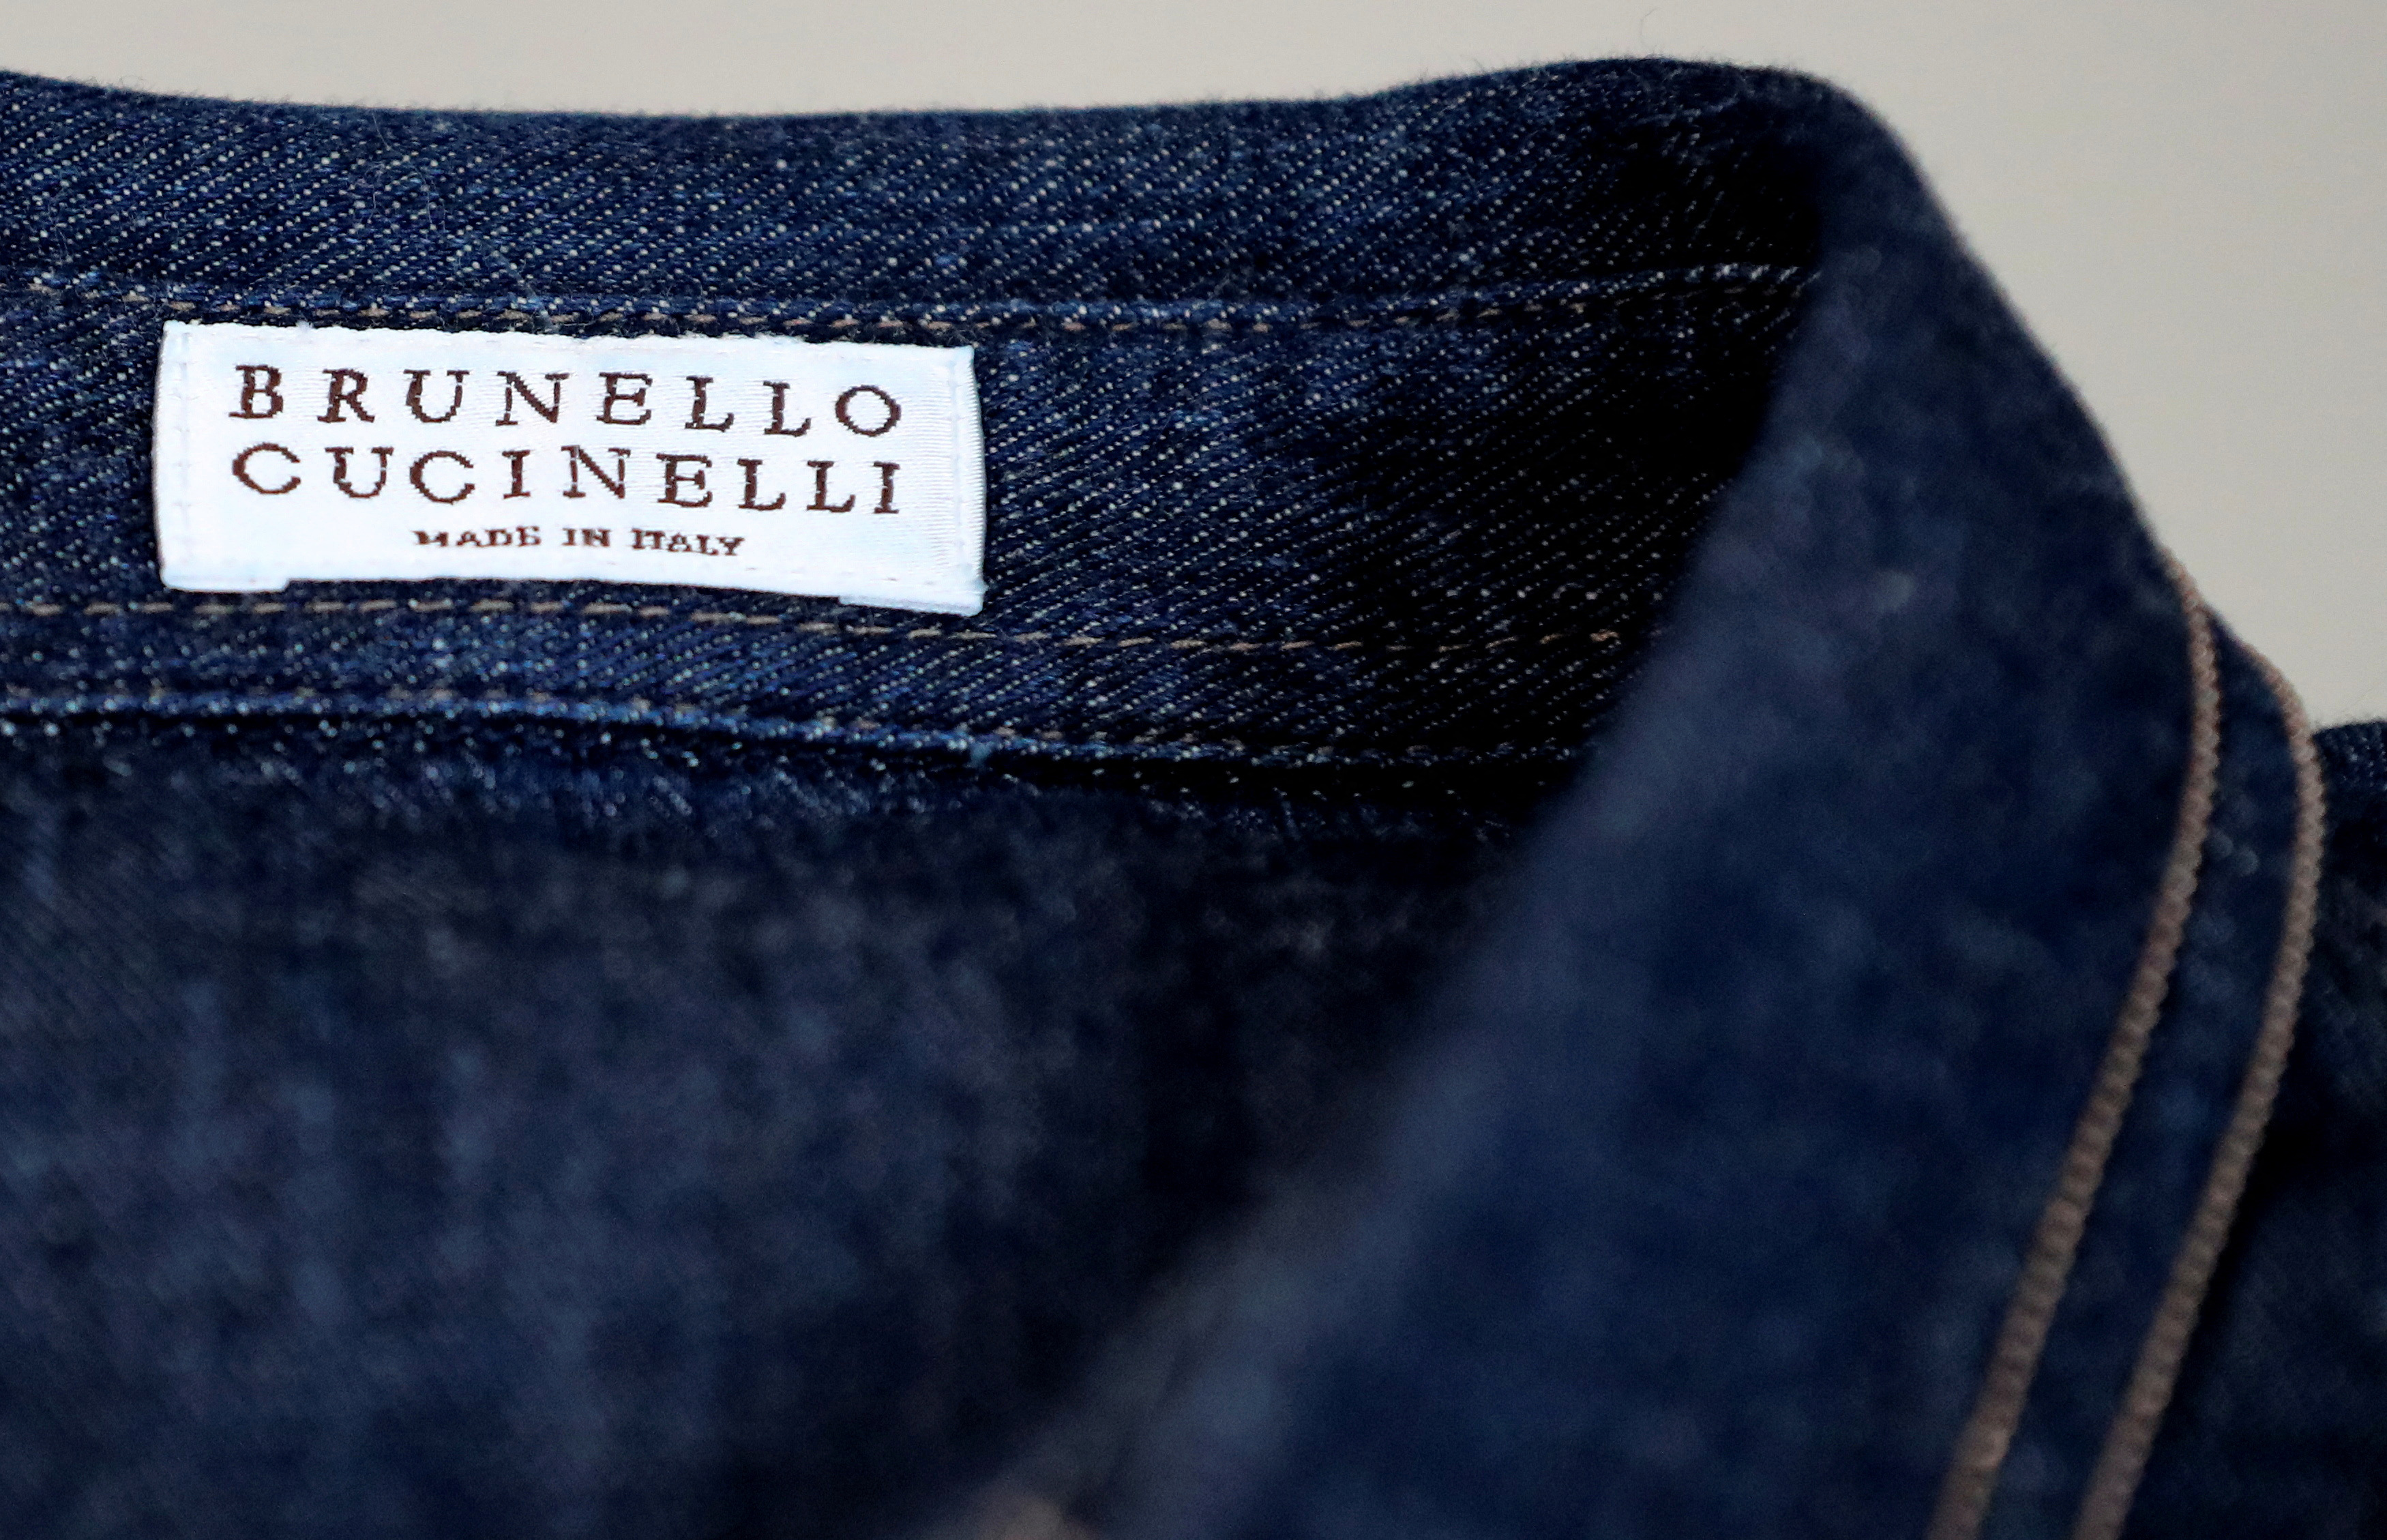 Cucinelli tops forecast with near 30% sales jump in 2022